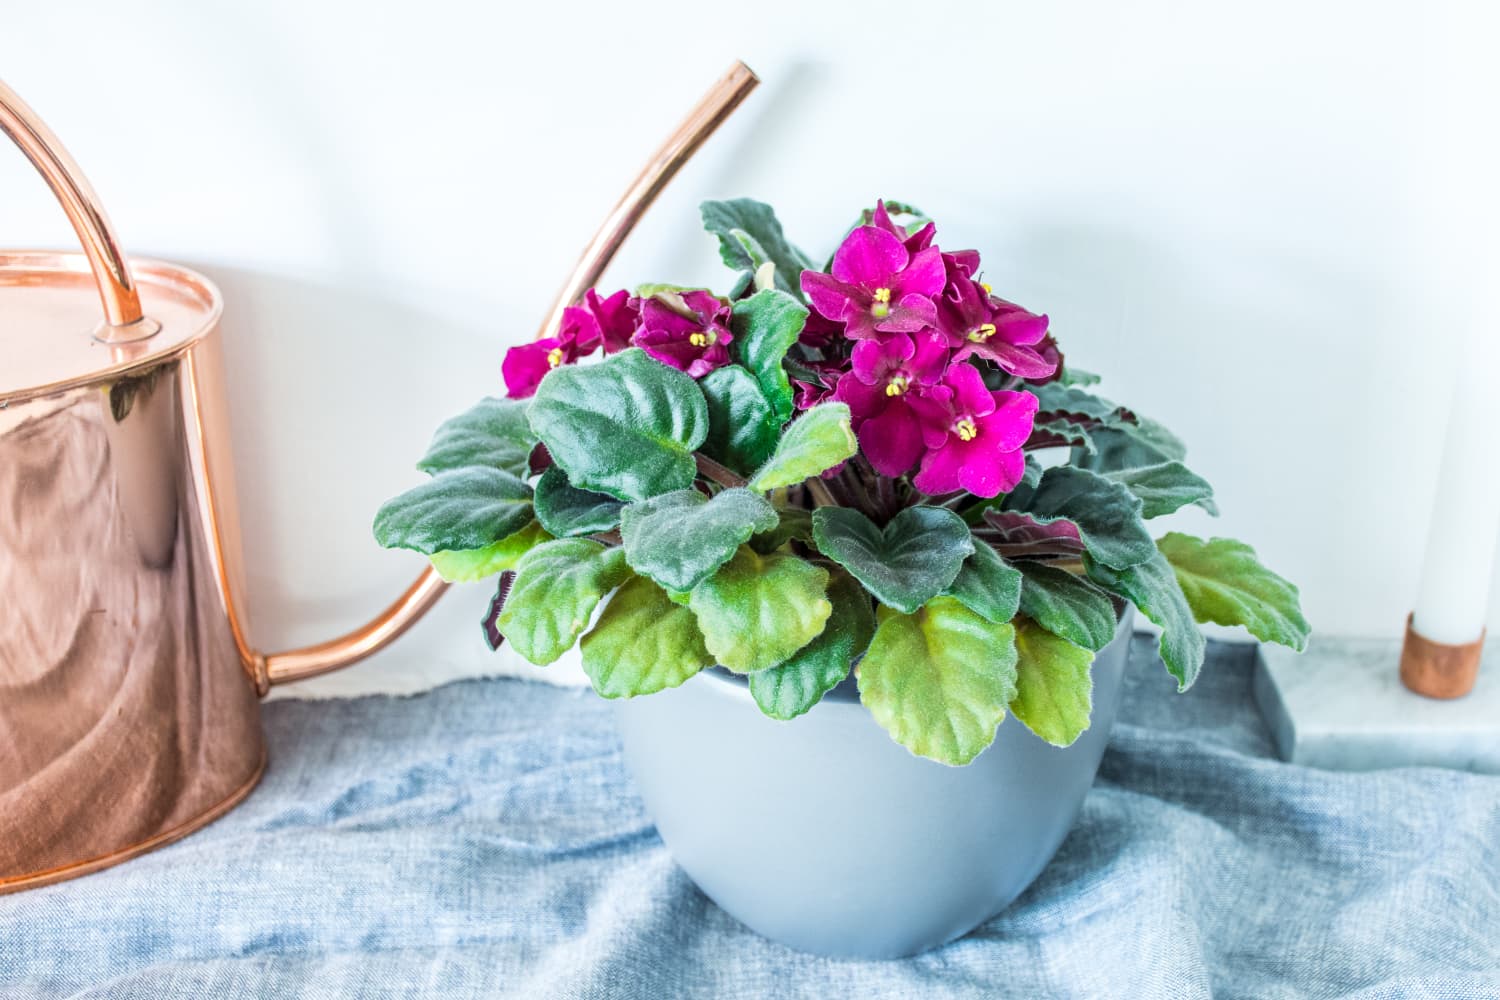 Easy Houseplant African violet Optimara 'Millennia' Live Plant in a 2 inch pot 